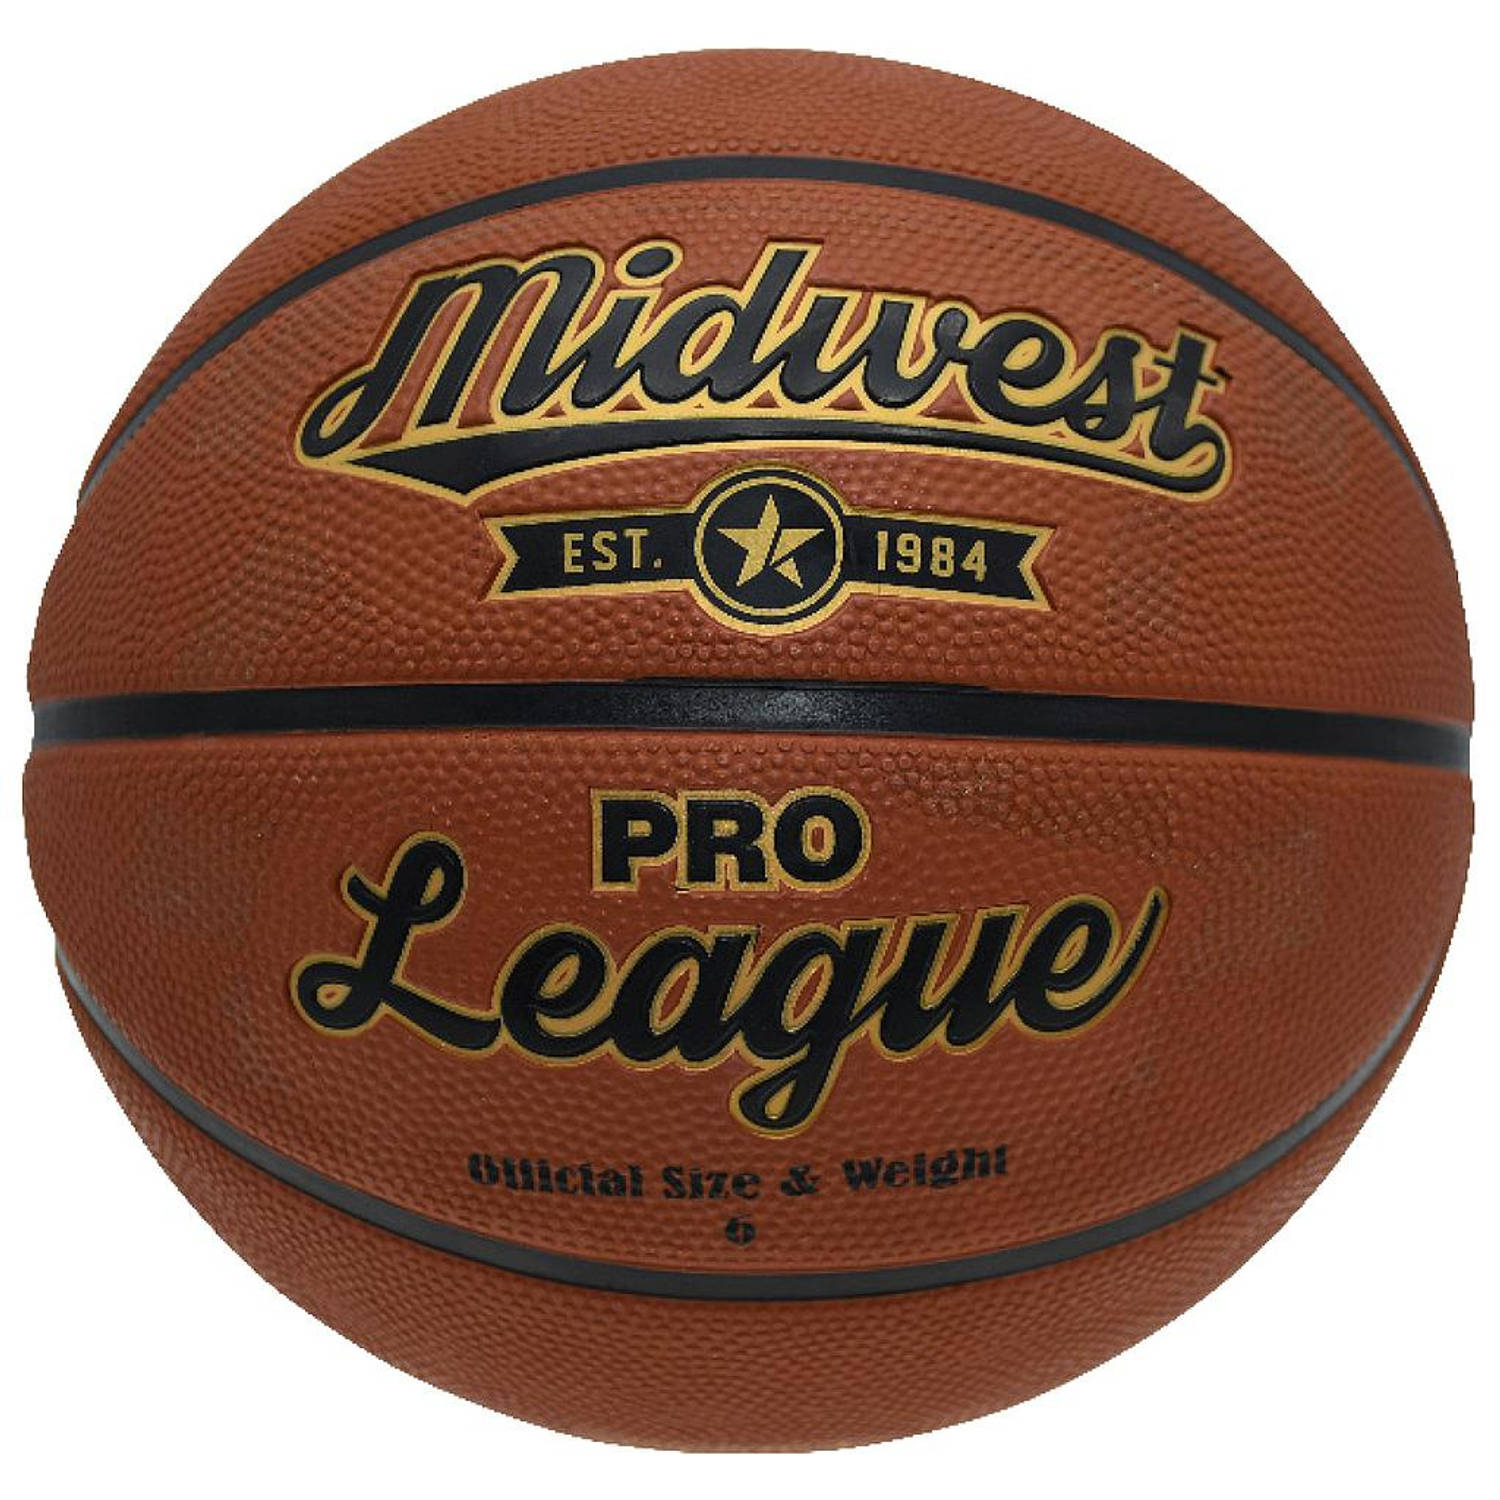 Midwest Basketbal Pro League Rubber/polyester Oranje Maat 7